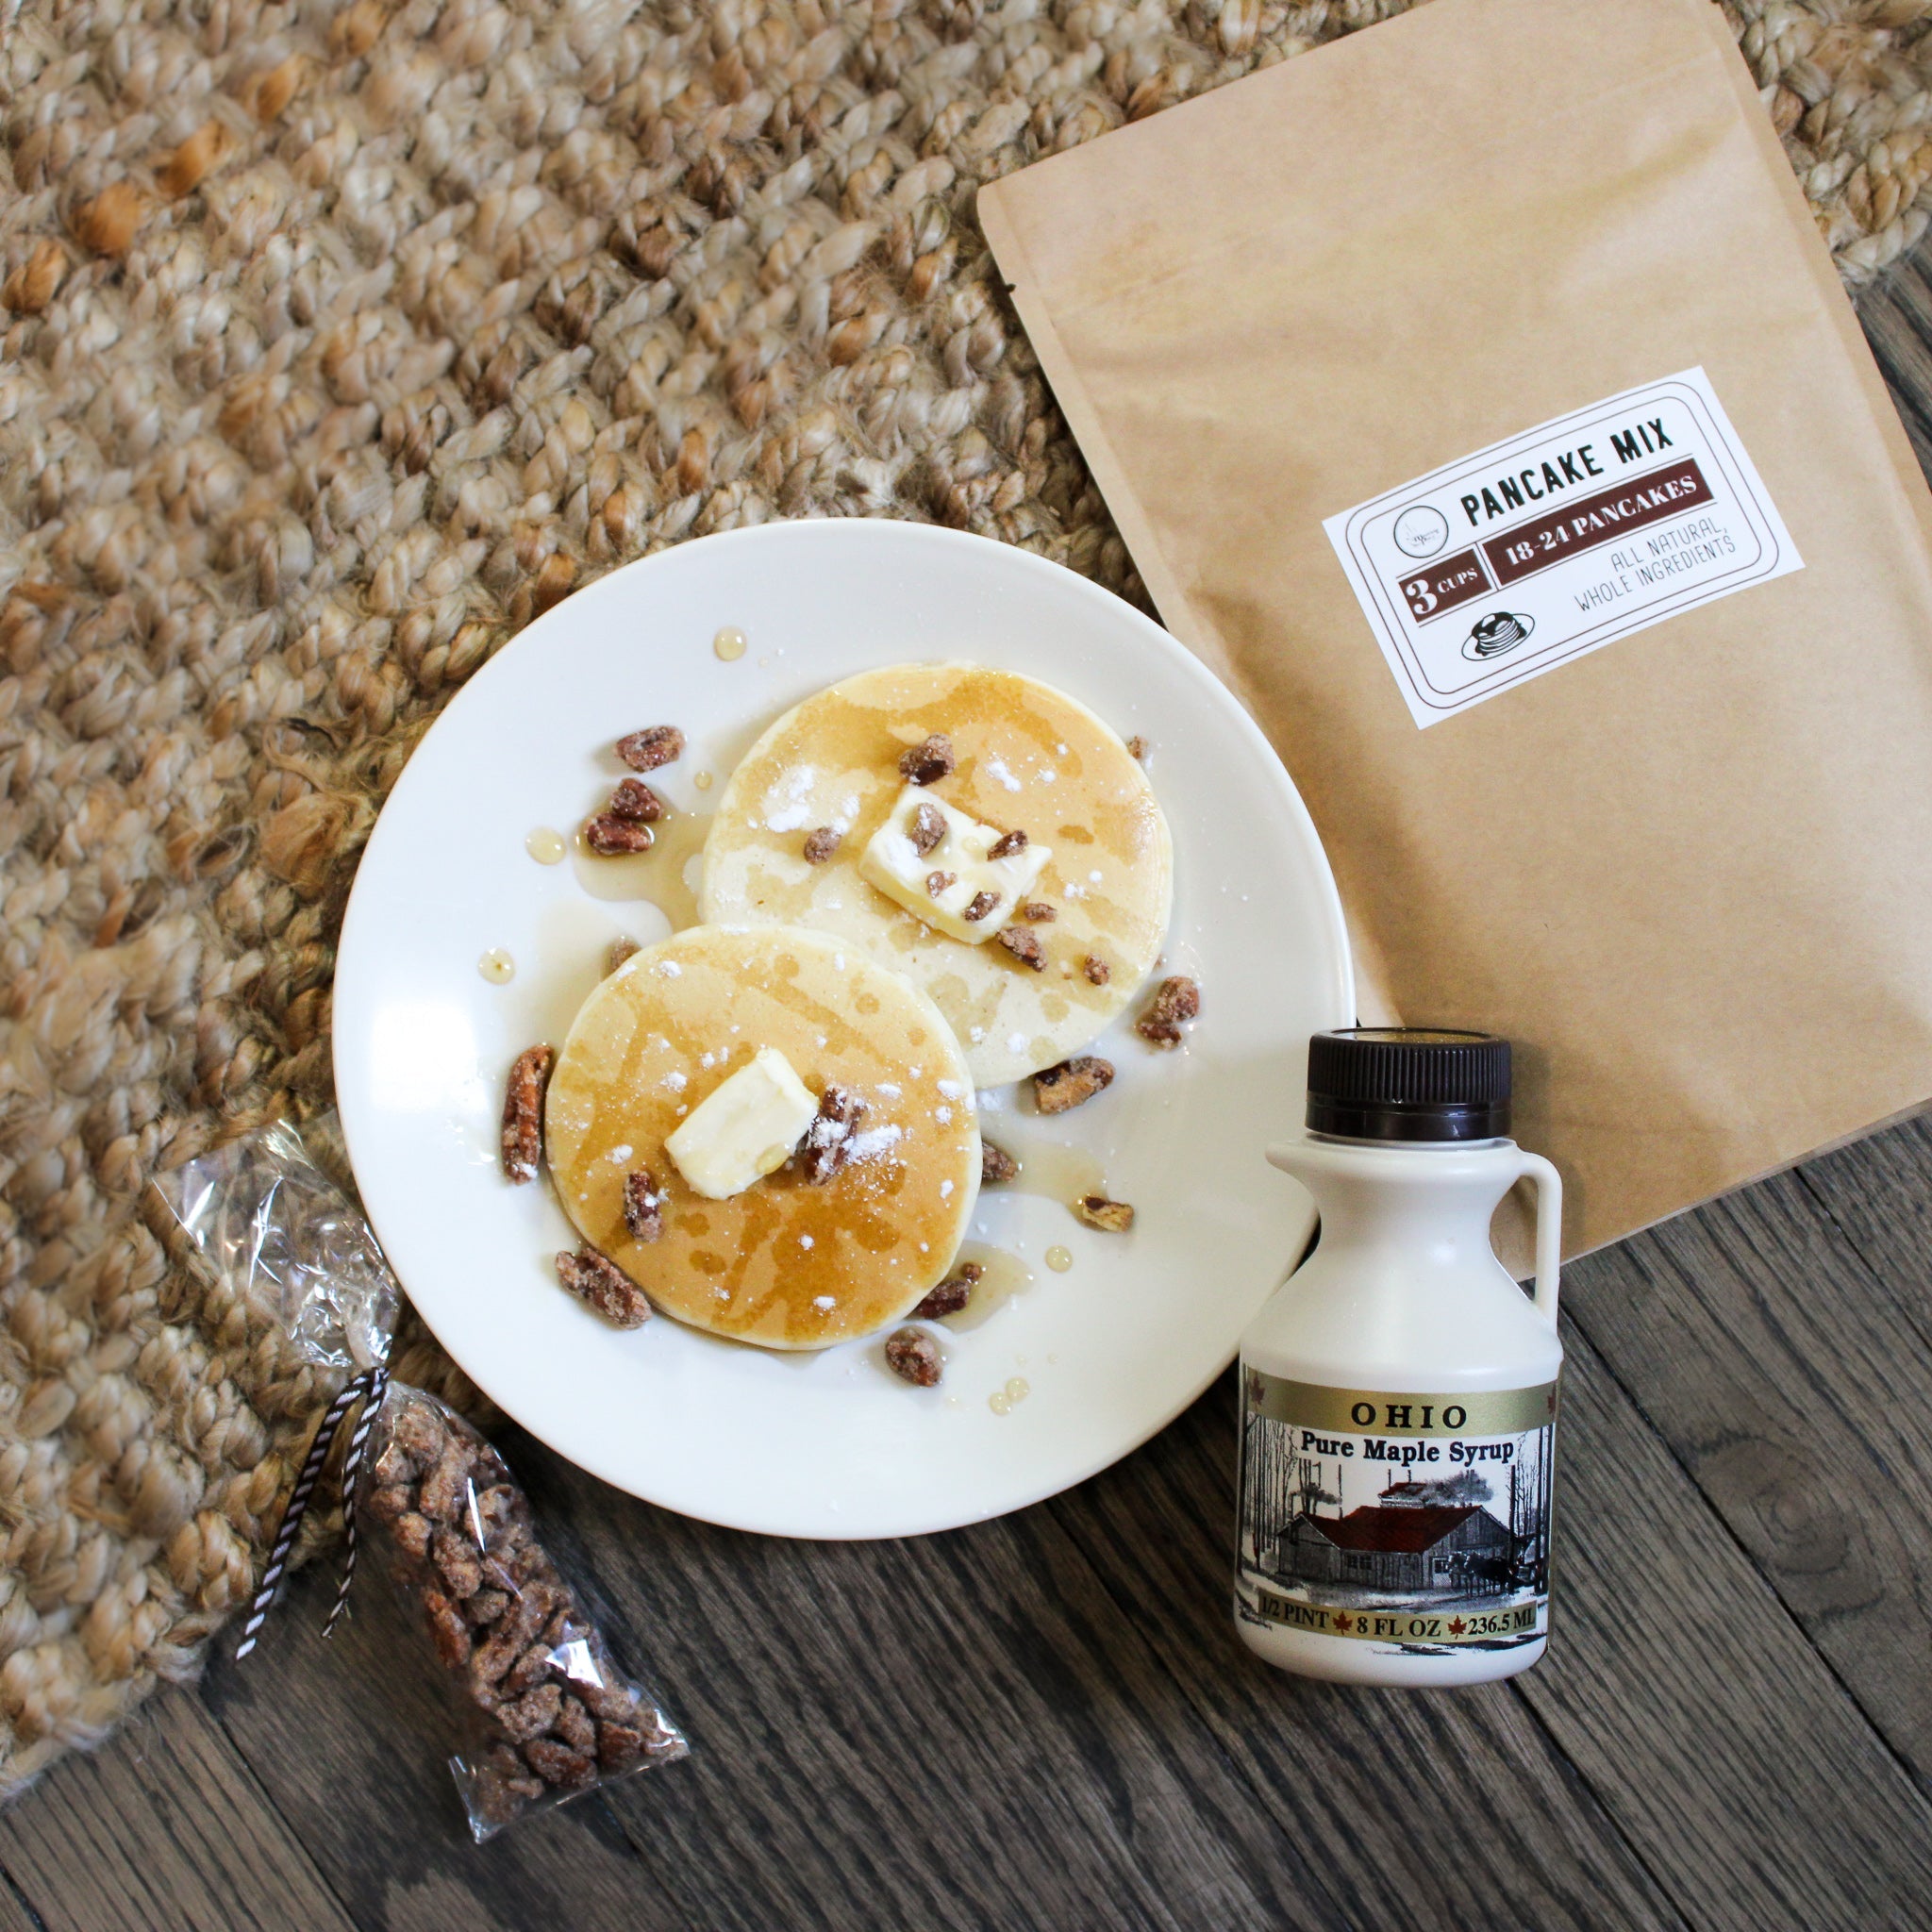 Breakfast in Bed Gift Box with Pancakes, Maple Syrup, and Coffee Baked Goods Gift Boxes - The Meeting Place on Market